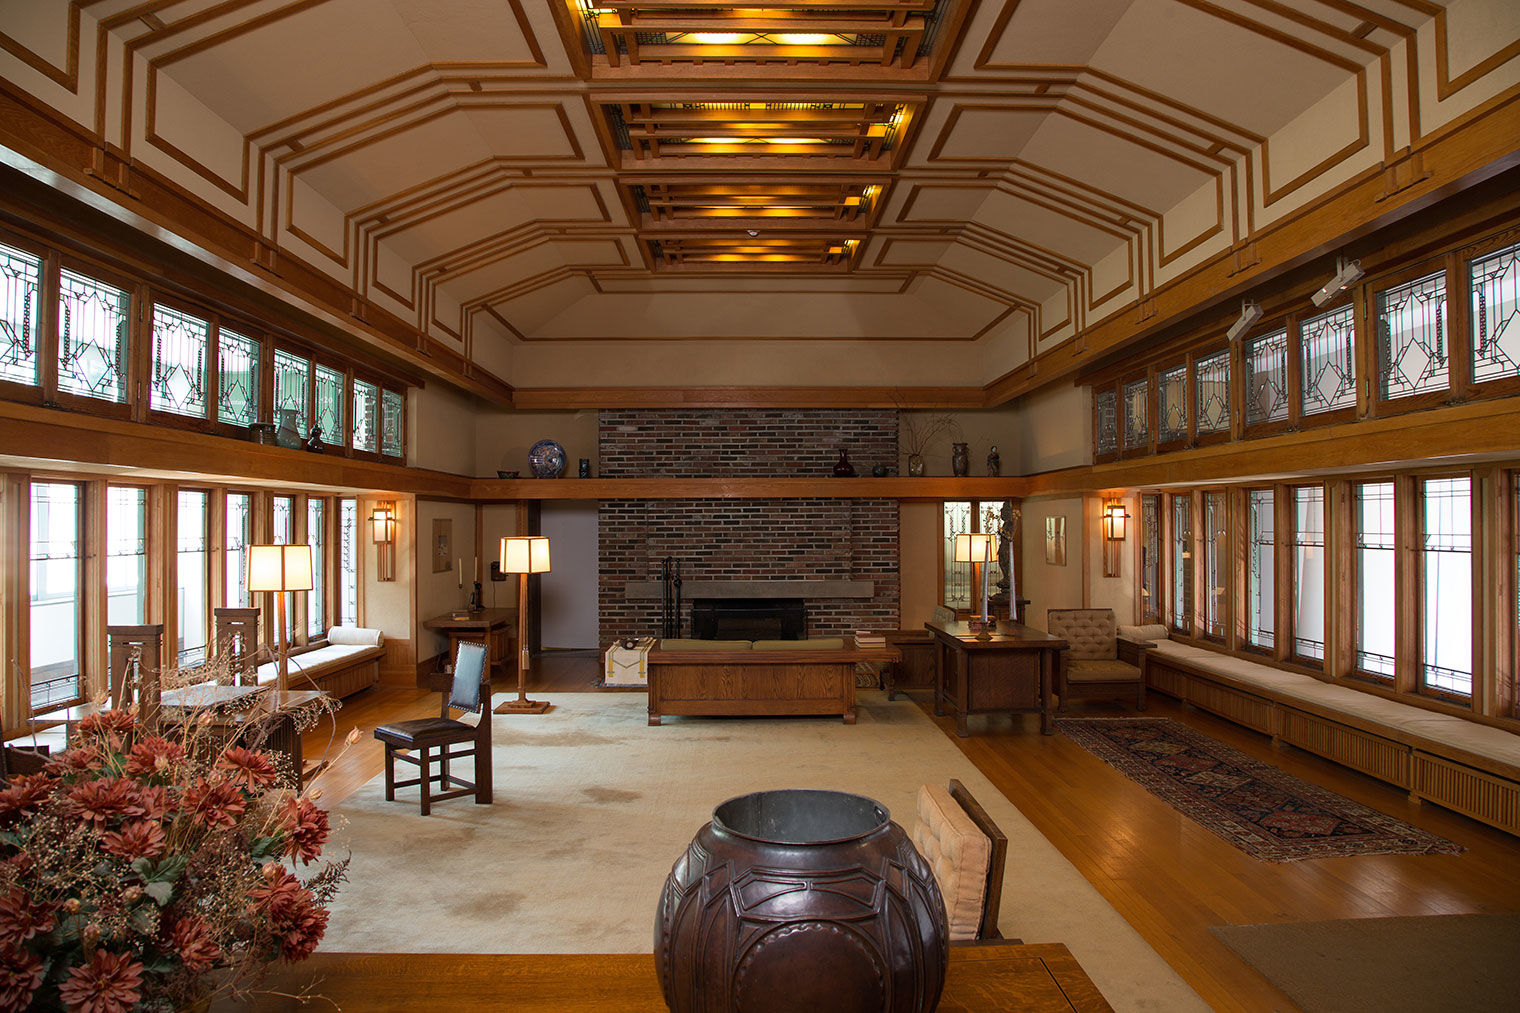 Large living room with oak trim and geometric windows